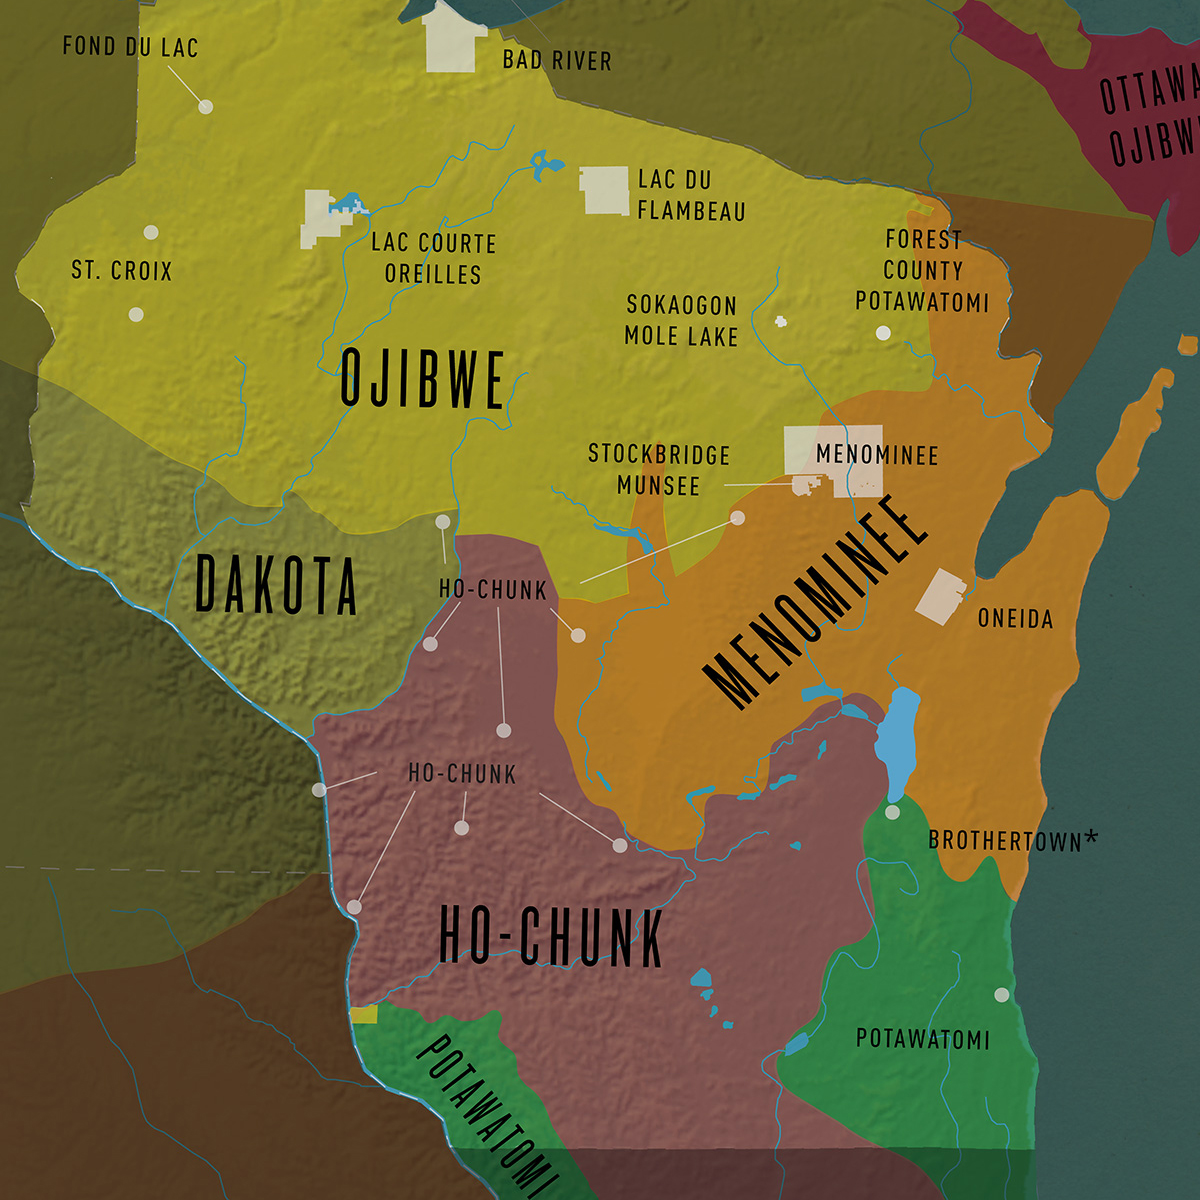 Map of the First Nations in Wisconsin